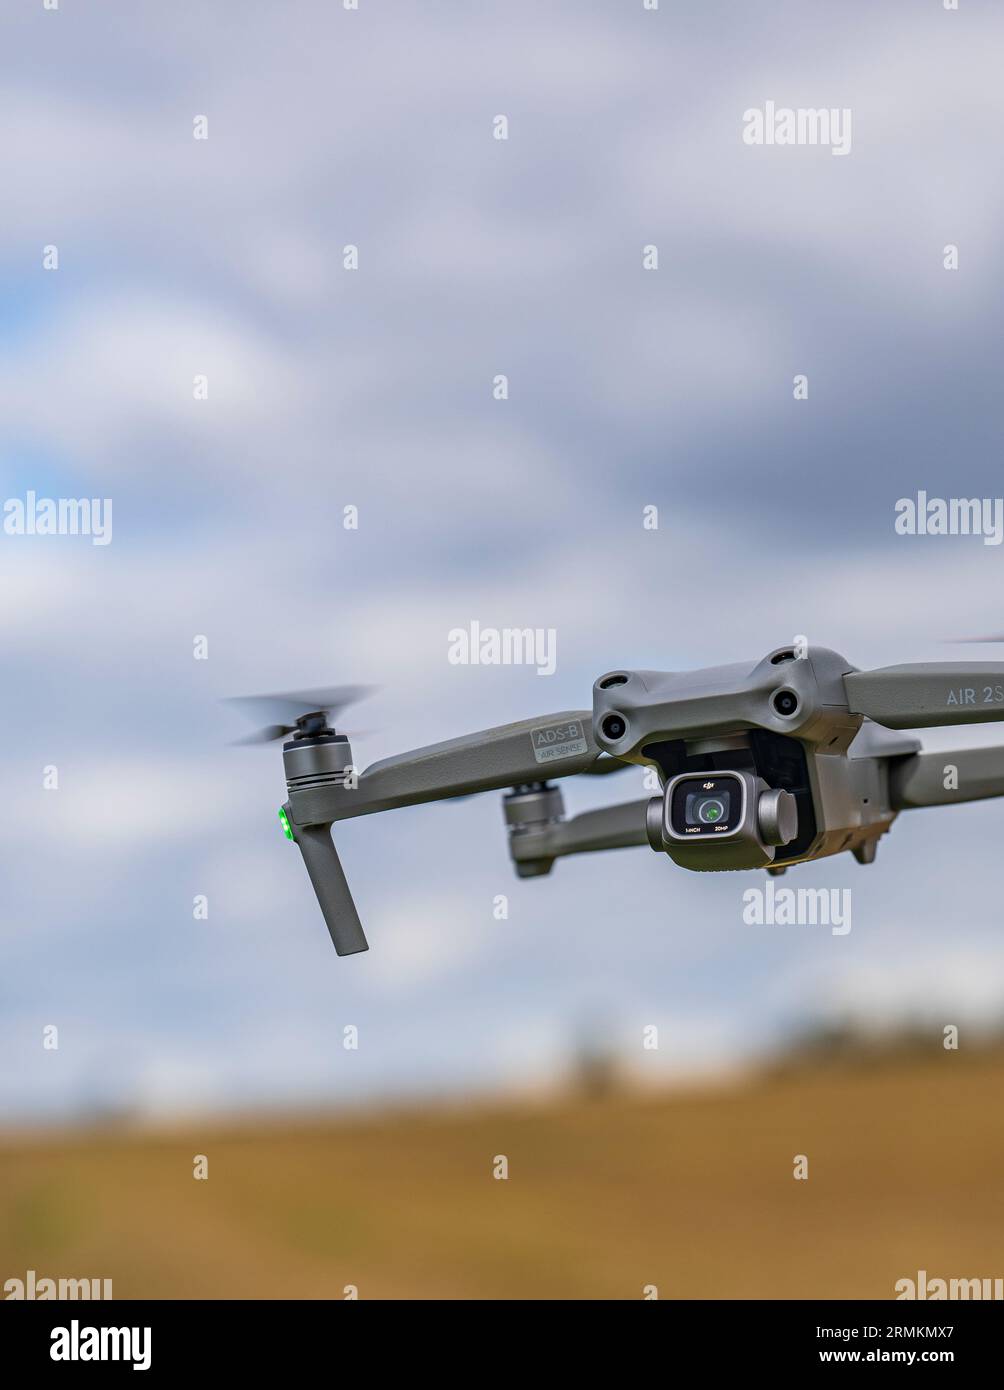 A DJI Air 2S Drone low to the ground as it hovers whist filming Stock Photo